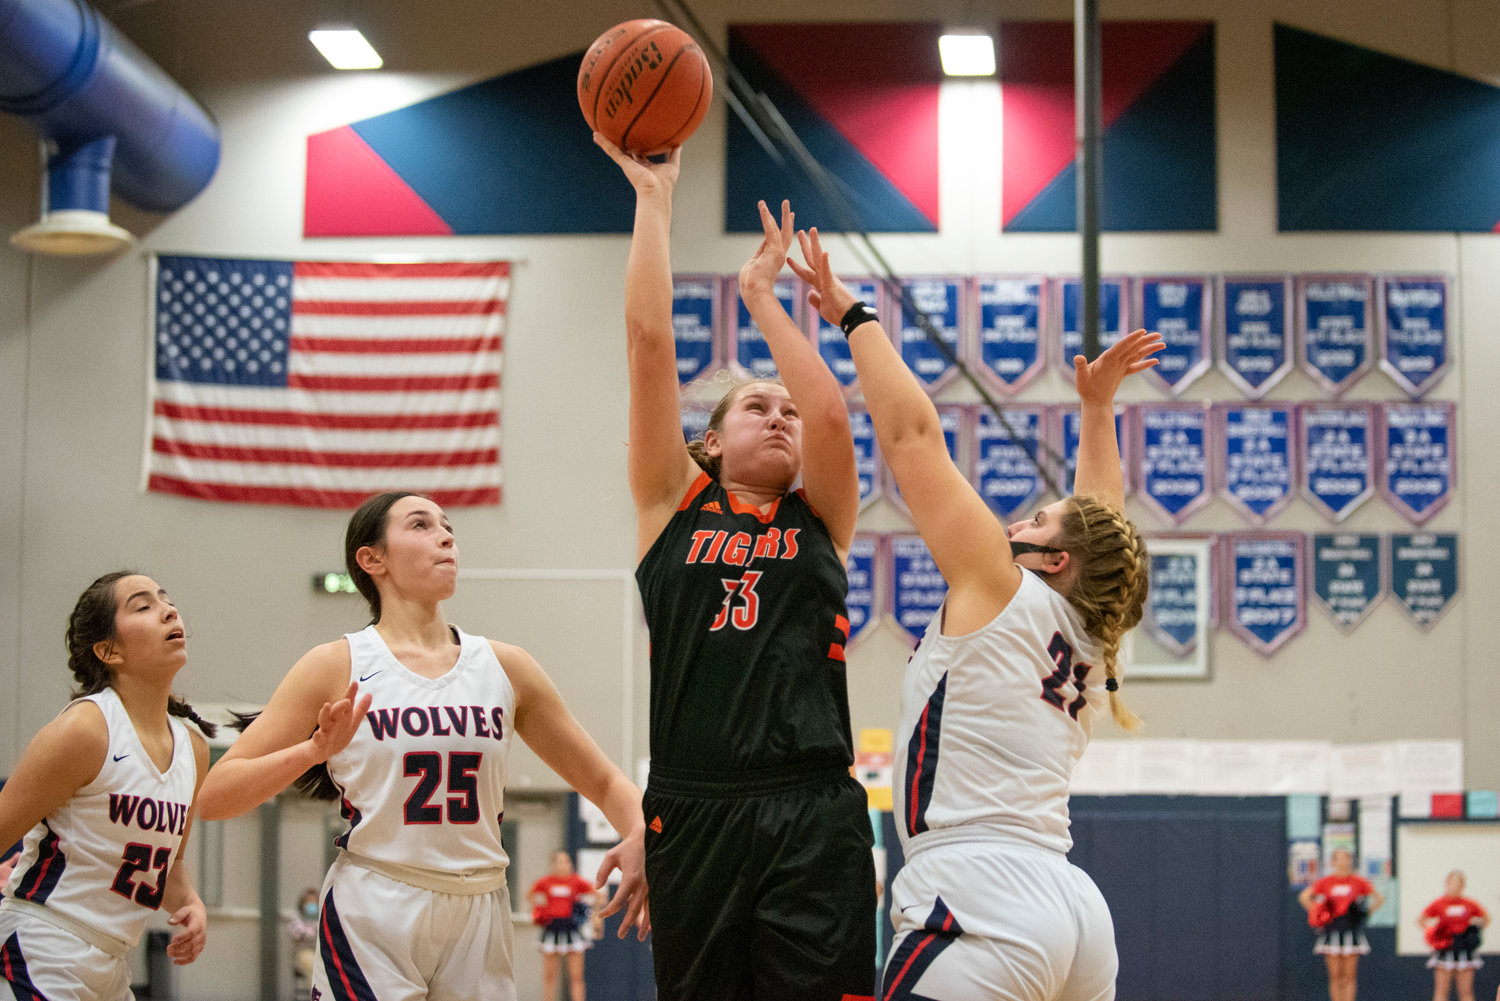 Centralia's Emily Wilkerson (33) puts up a shot in the paint during a road victory over Black Hills on Friday.